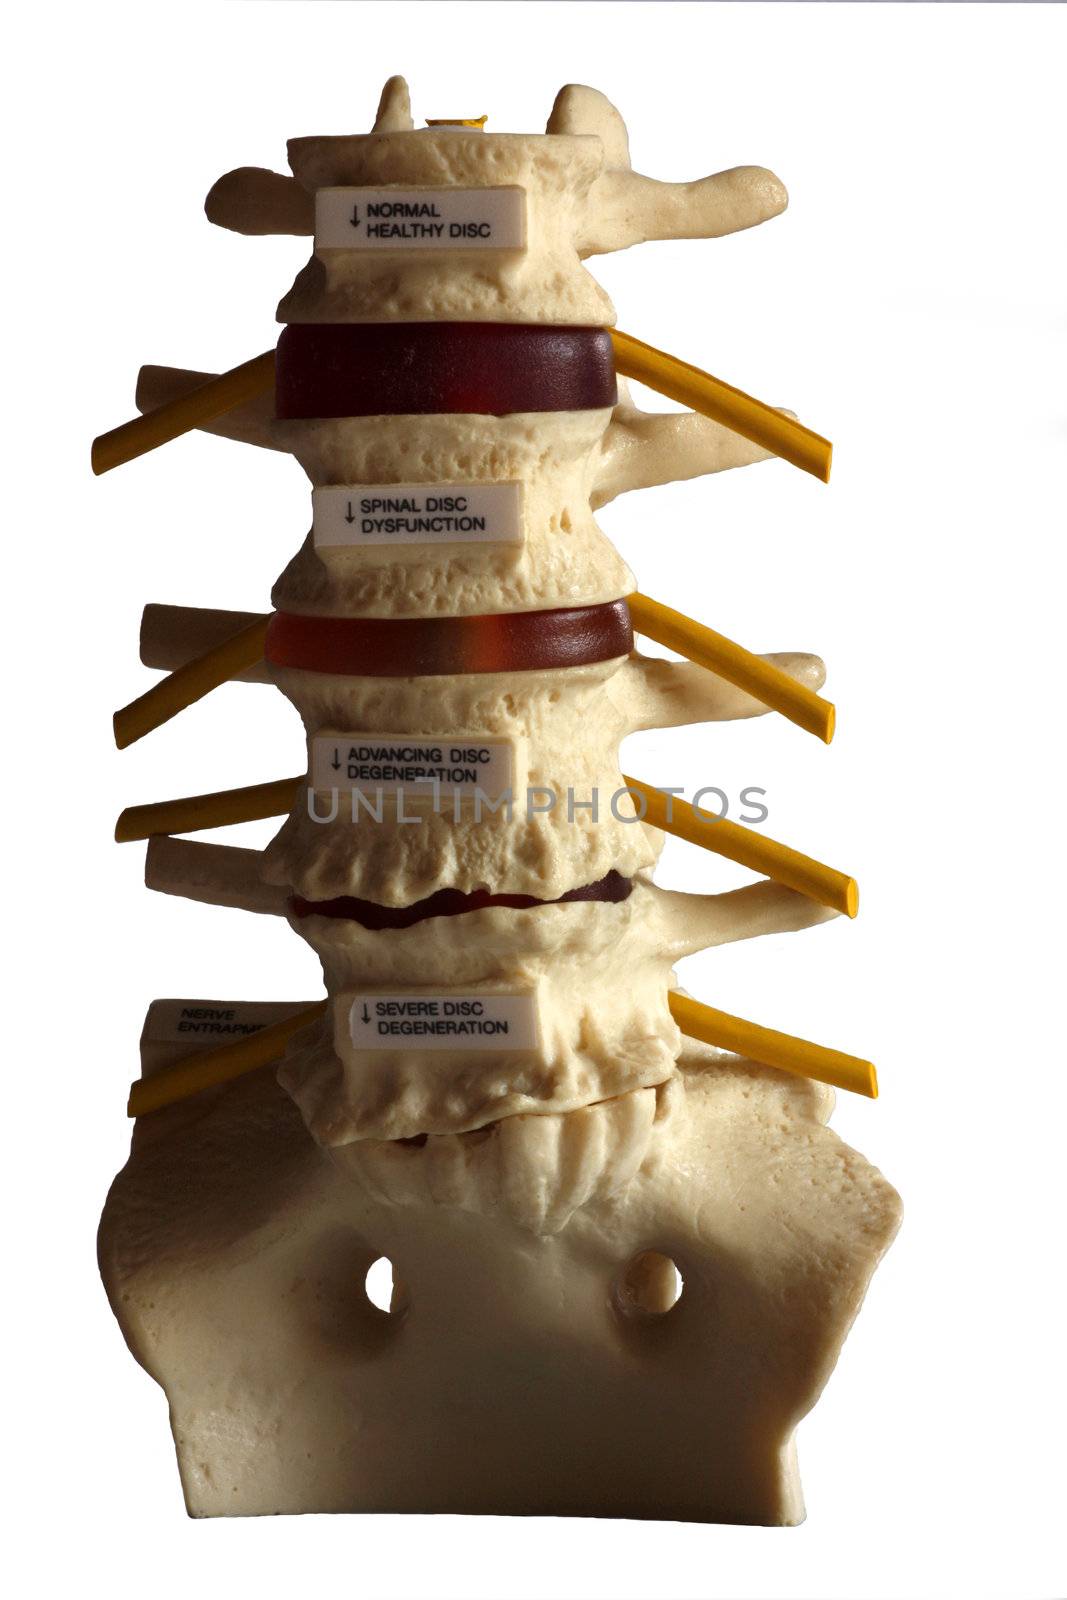 Model of a human spine